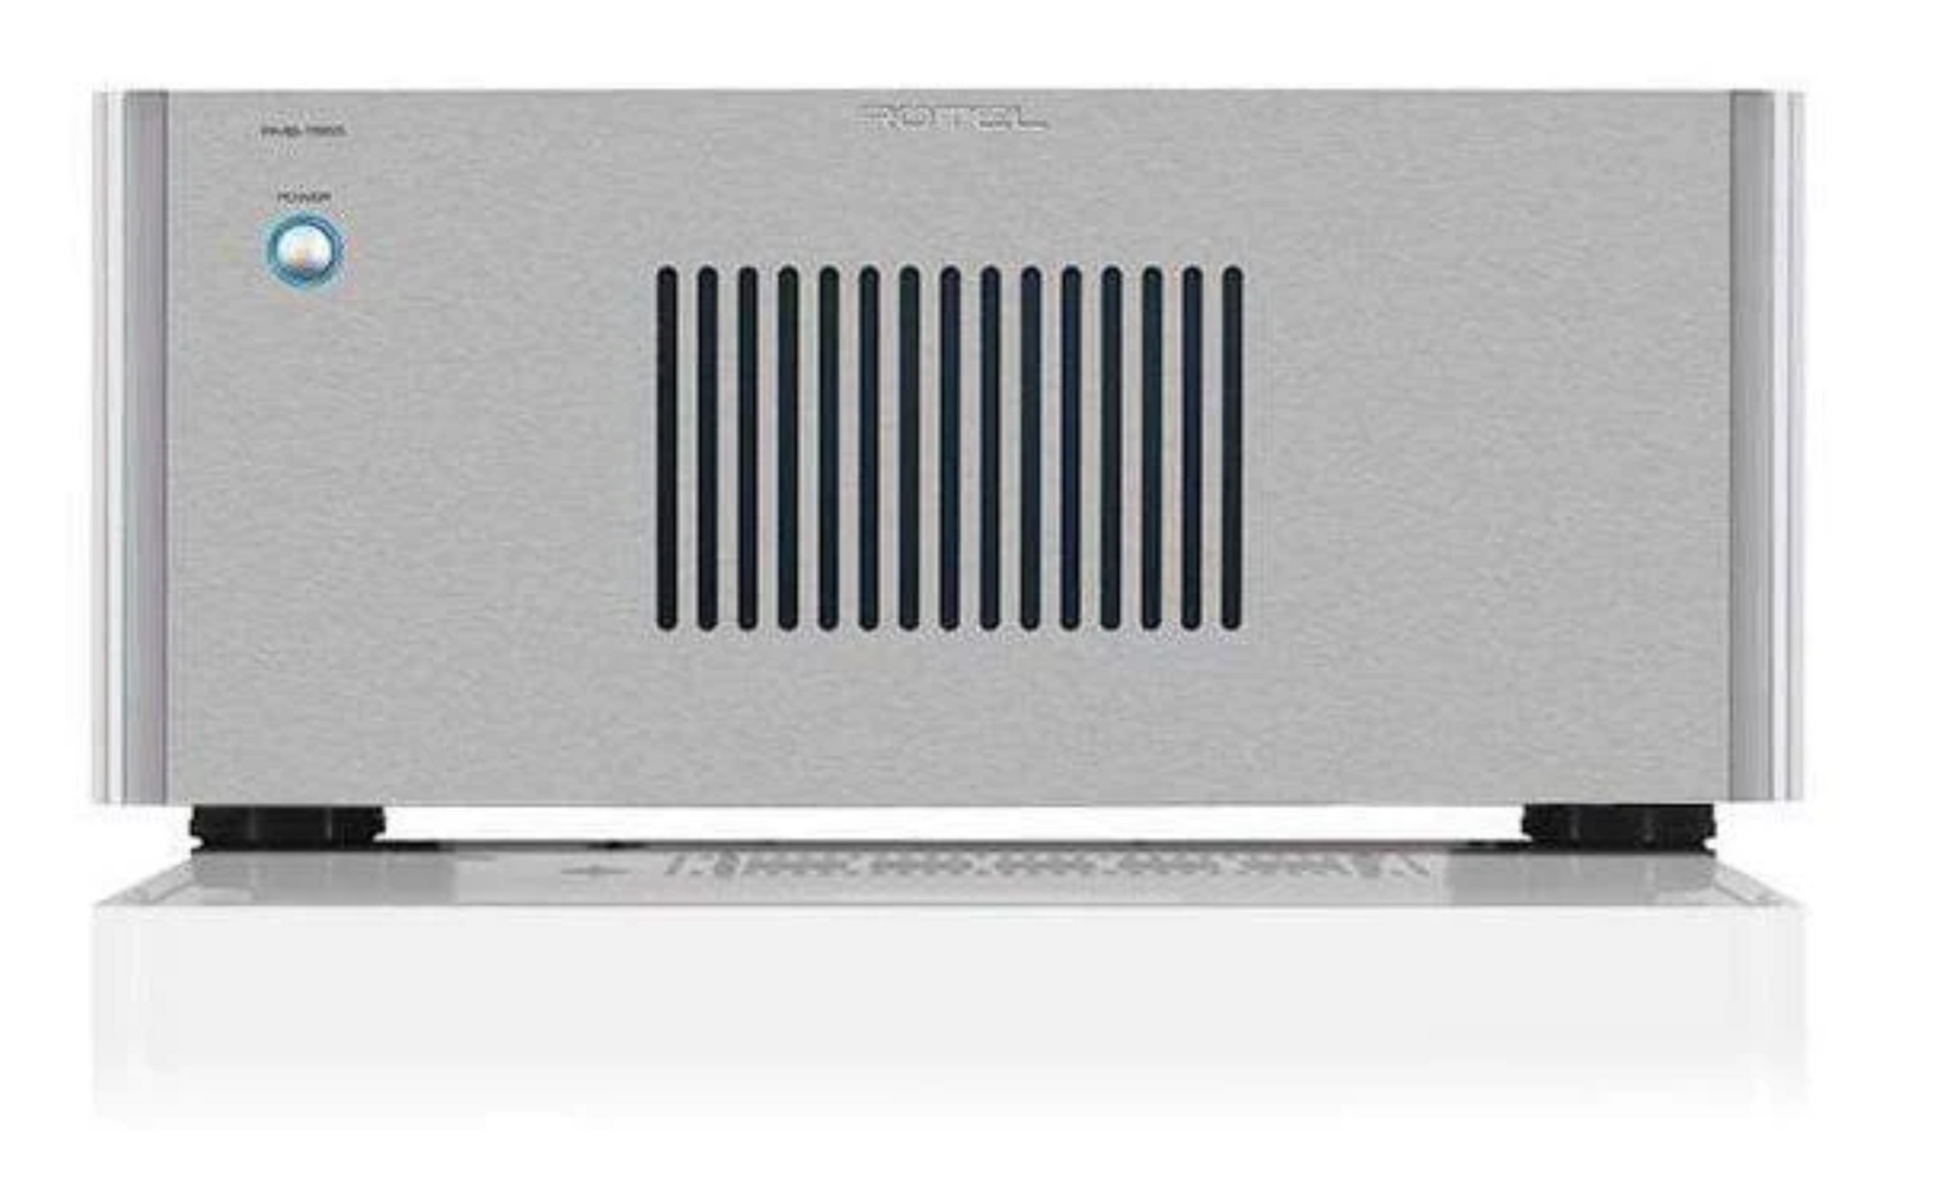 Rotel RMB-1555 Multichannel Surround Power Amplifier, in Silver